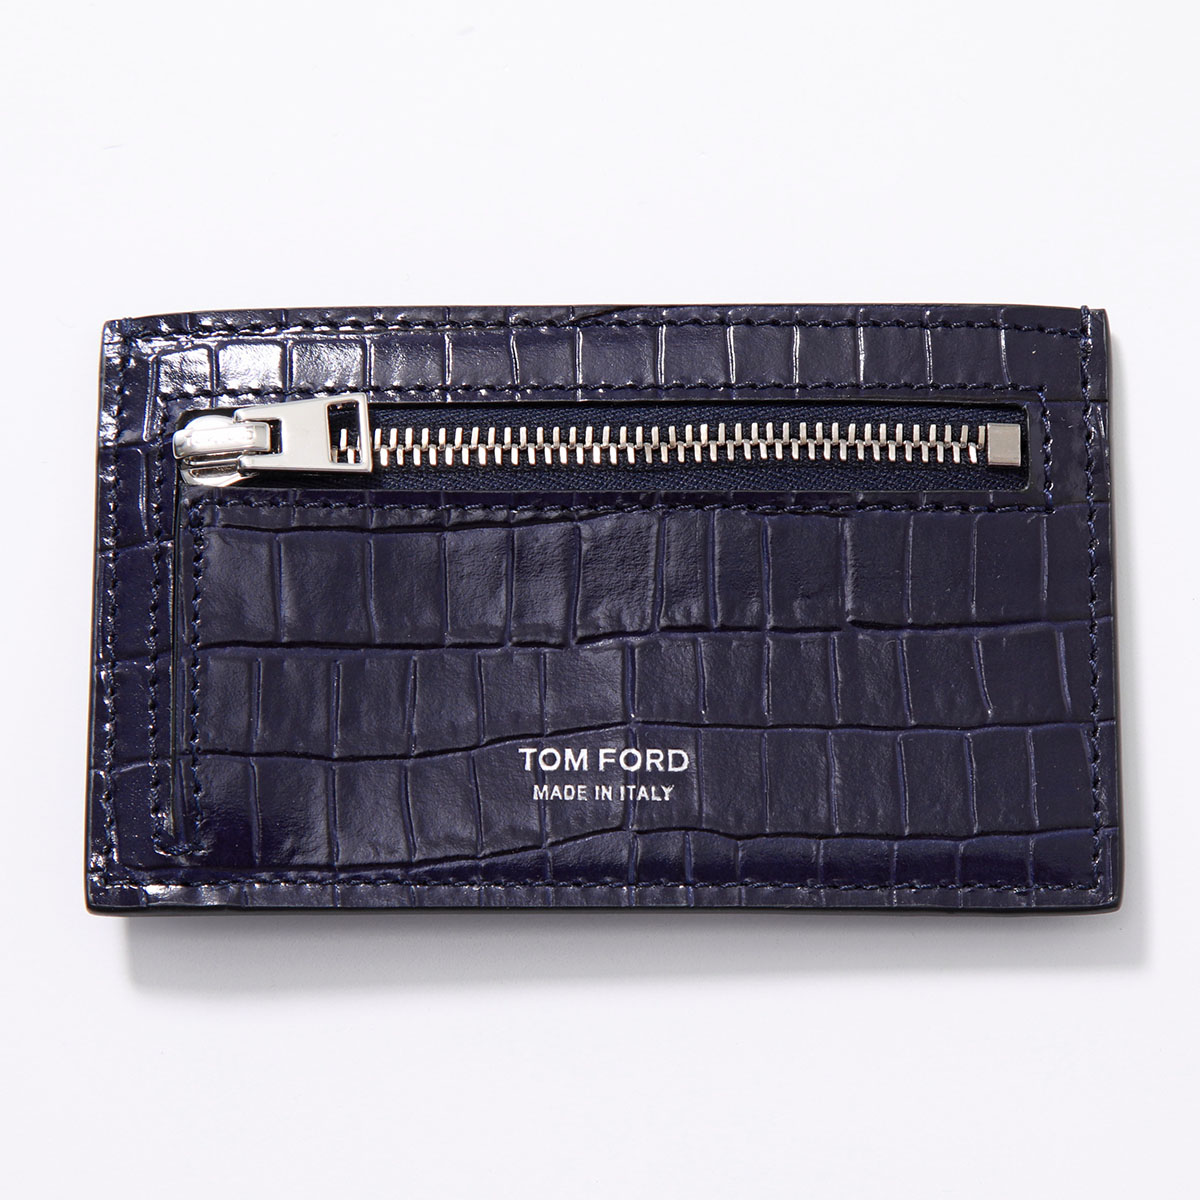 TOM FORD トムフォード コインケース カードケース Y0354 LCL239G LCL239...